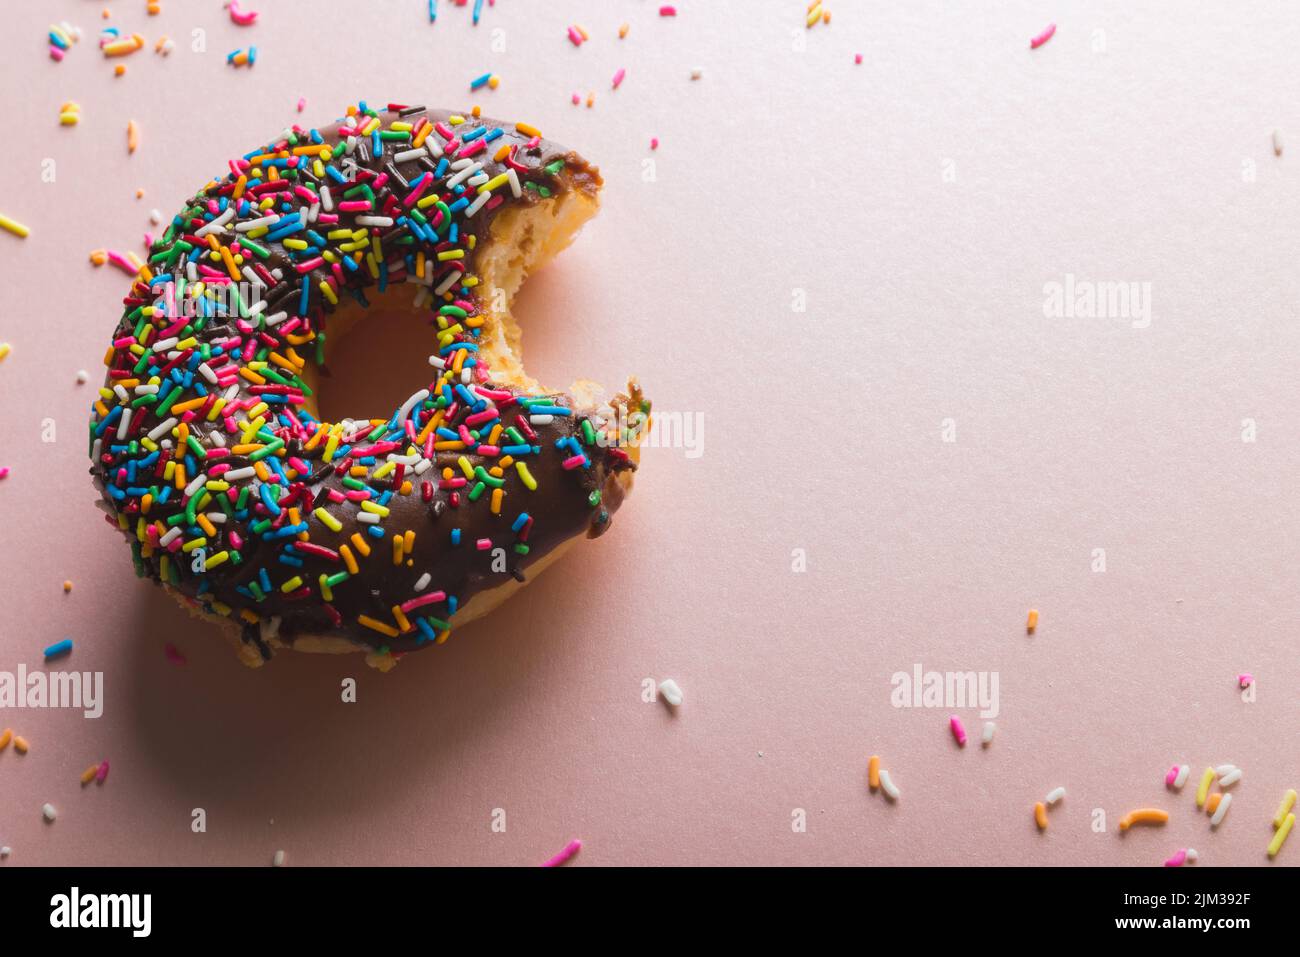 Overhead view of missing bite of chocolate donut with sprinklers by copy space on pink background. unaltered, unhealthy eating and sweet food concept. Stock Photo